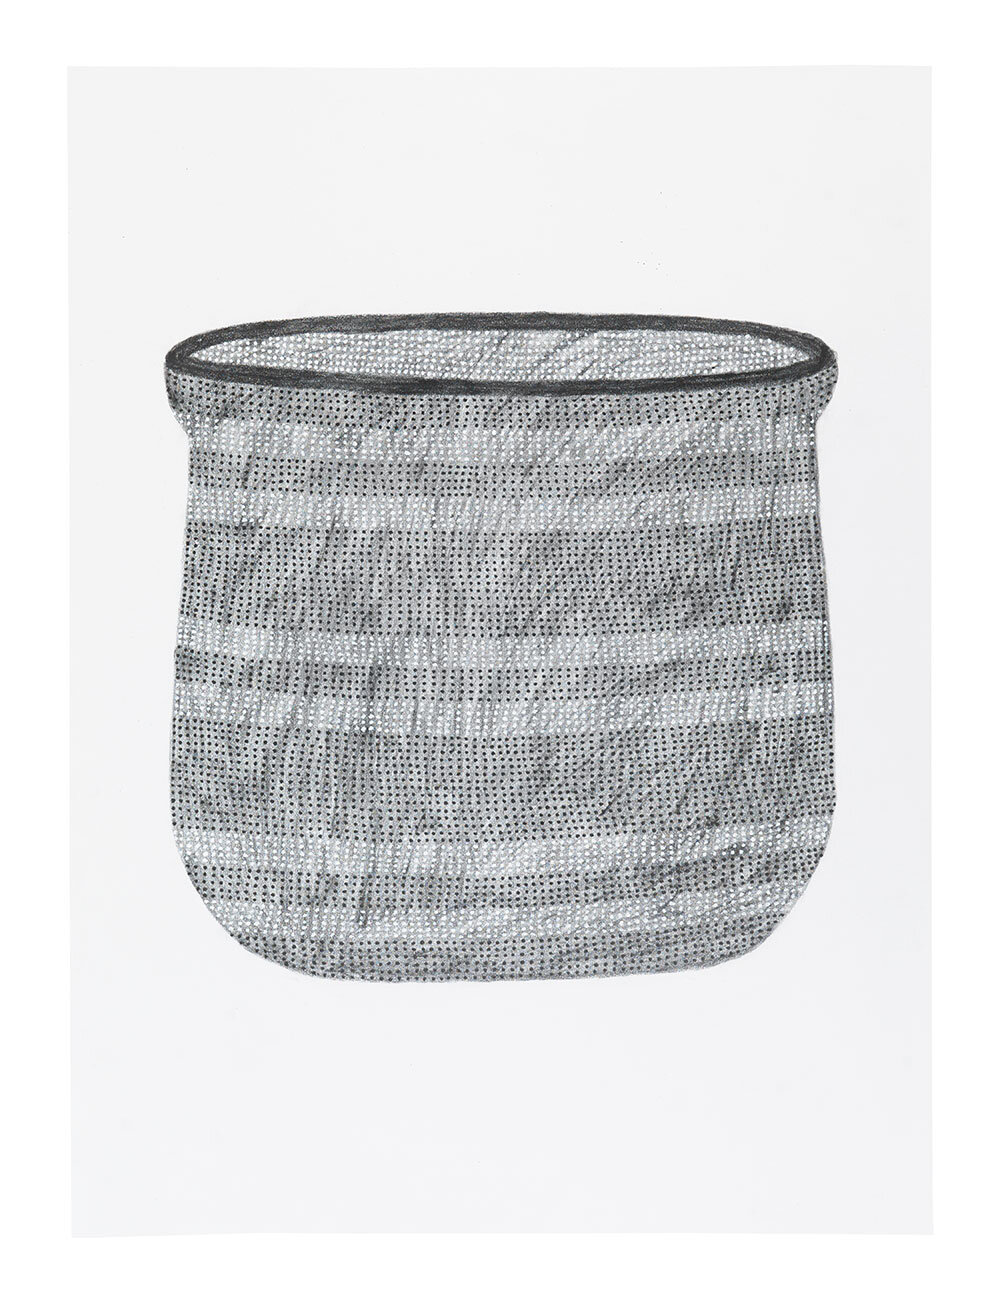   Round Black &amp; White Dot Basket  Graphite and paint on paper  30 x 22 inches   